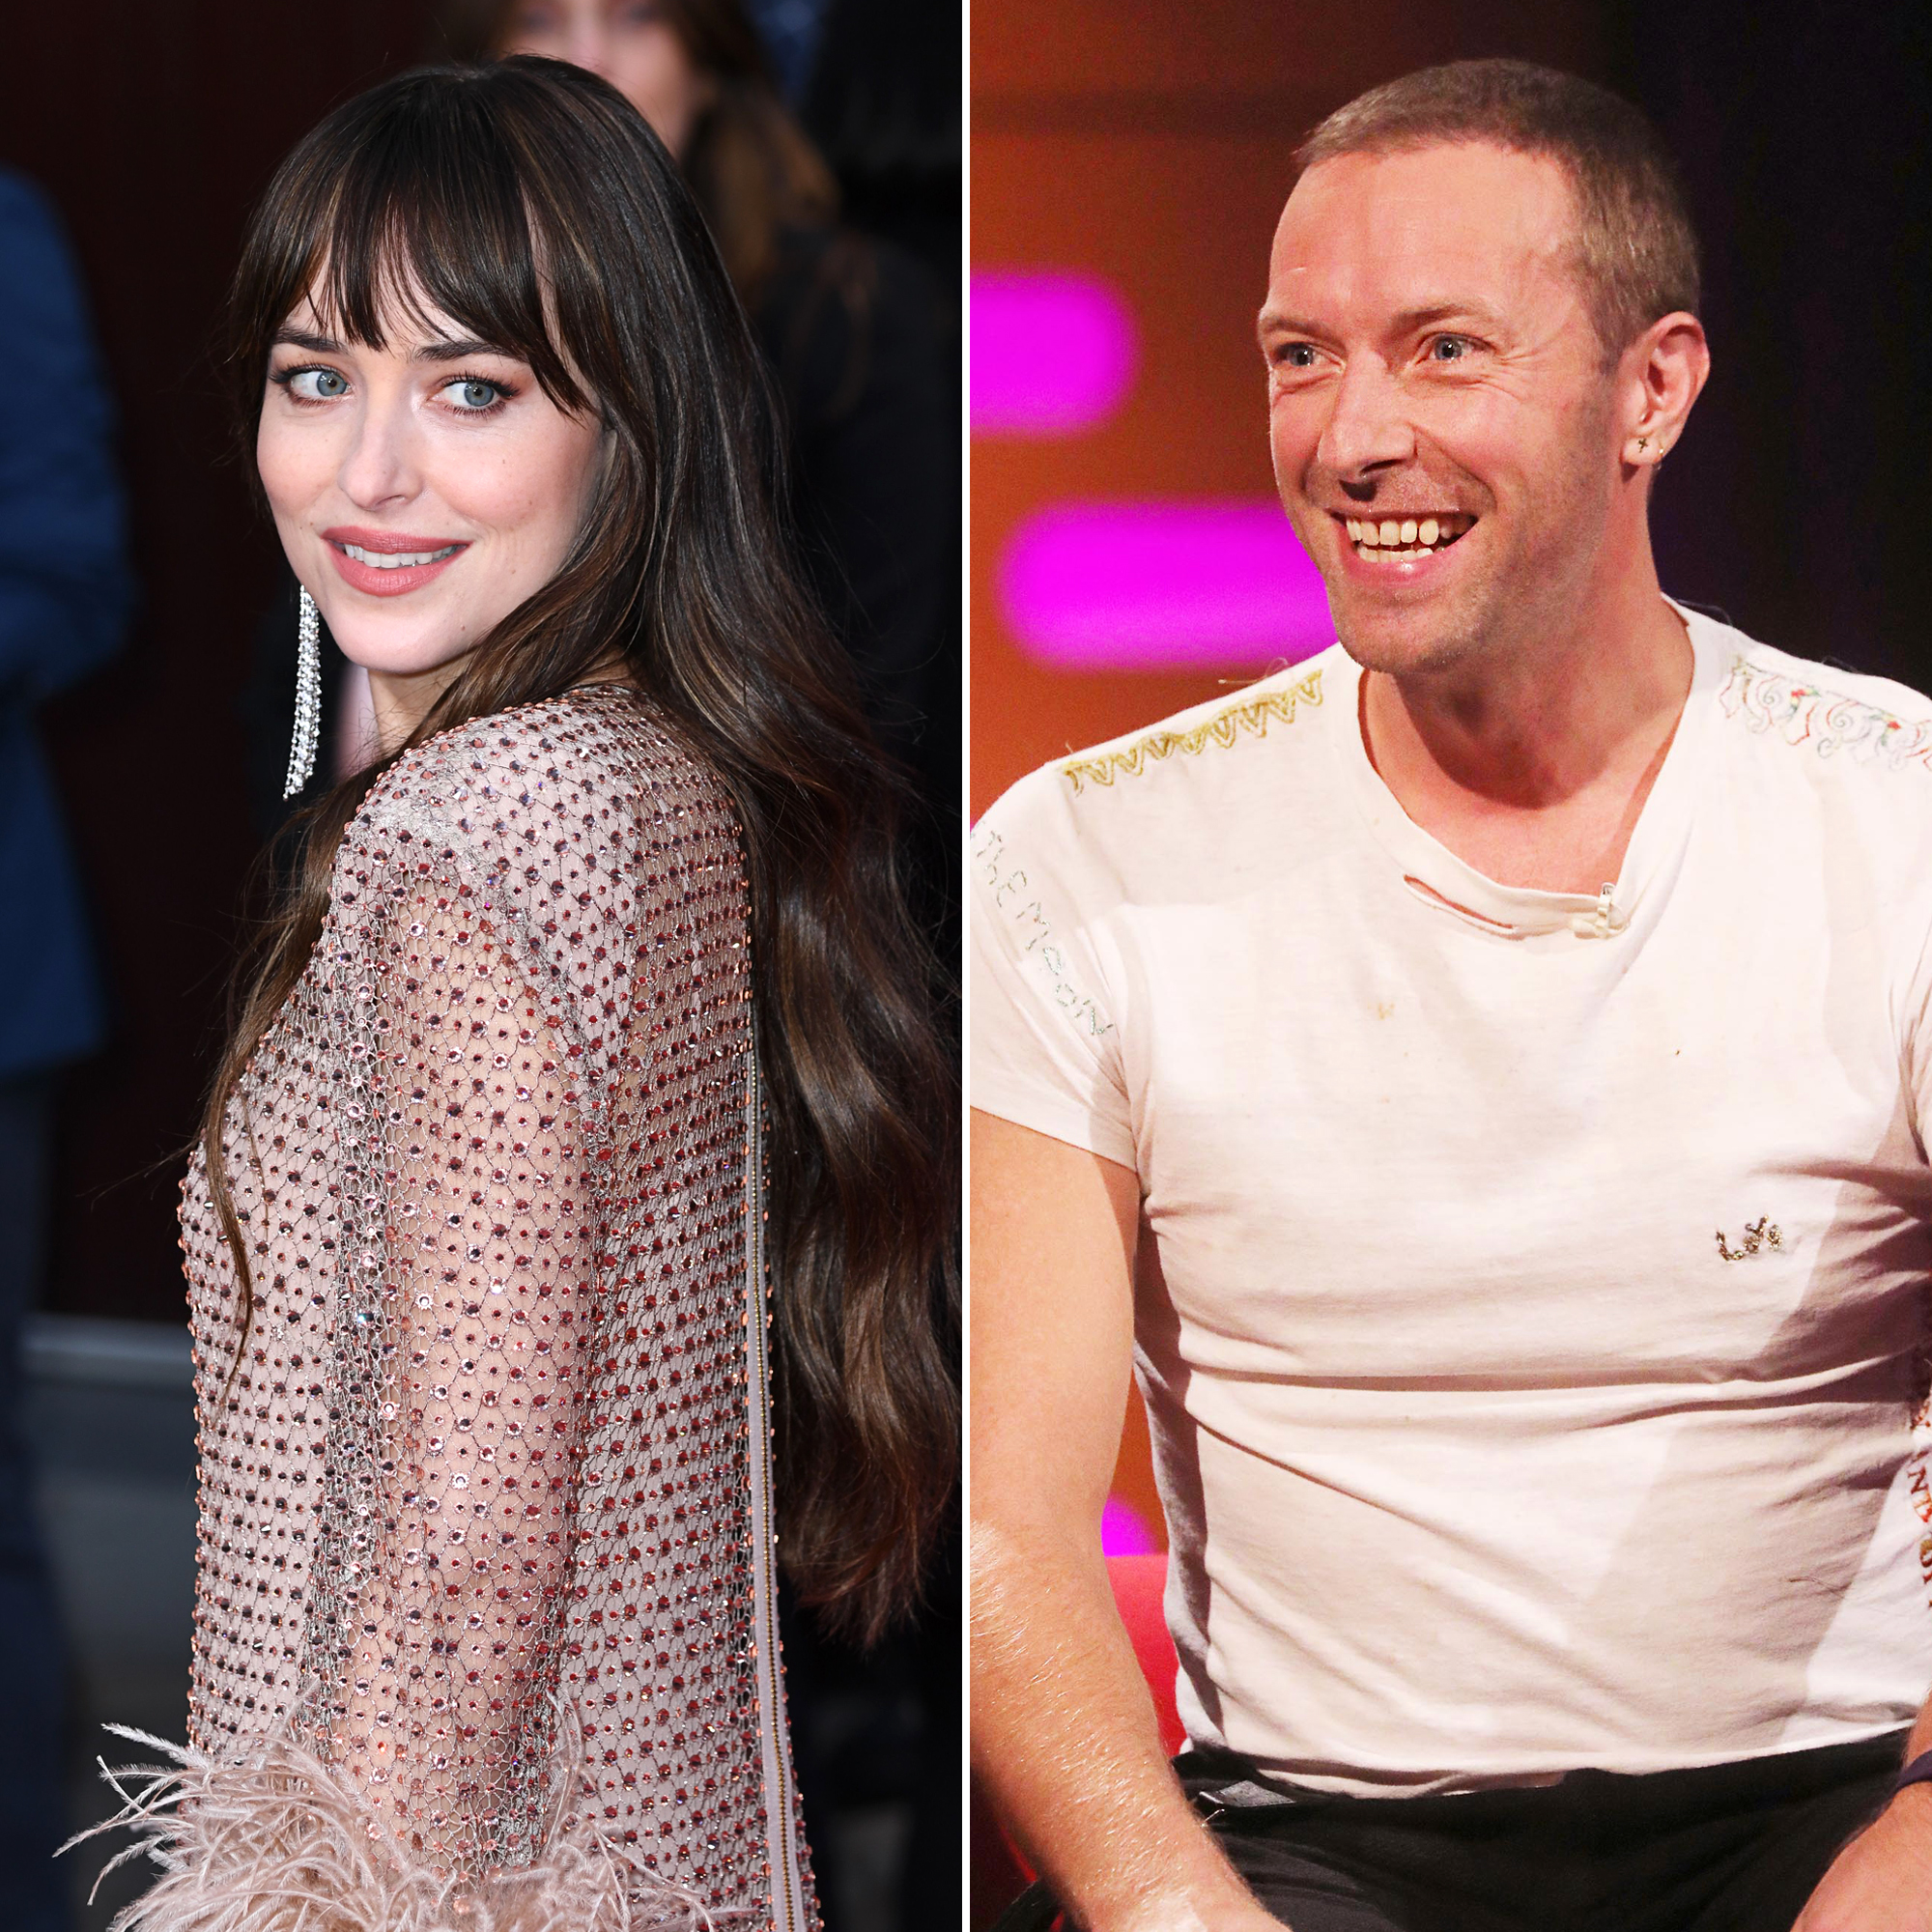 Dakota Johnson rocked a plunging neckline and braless look at the 